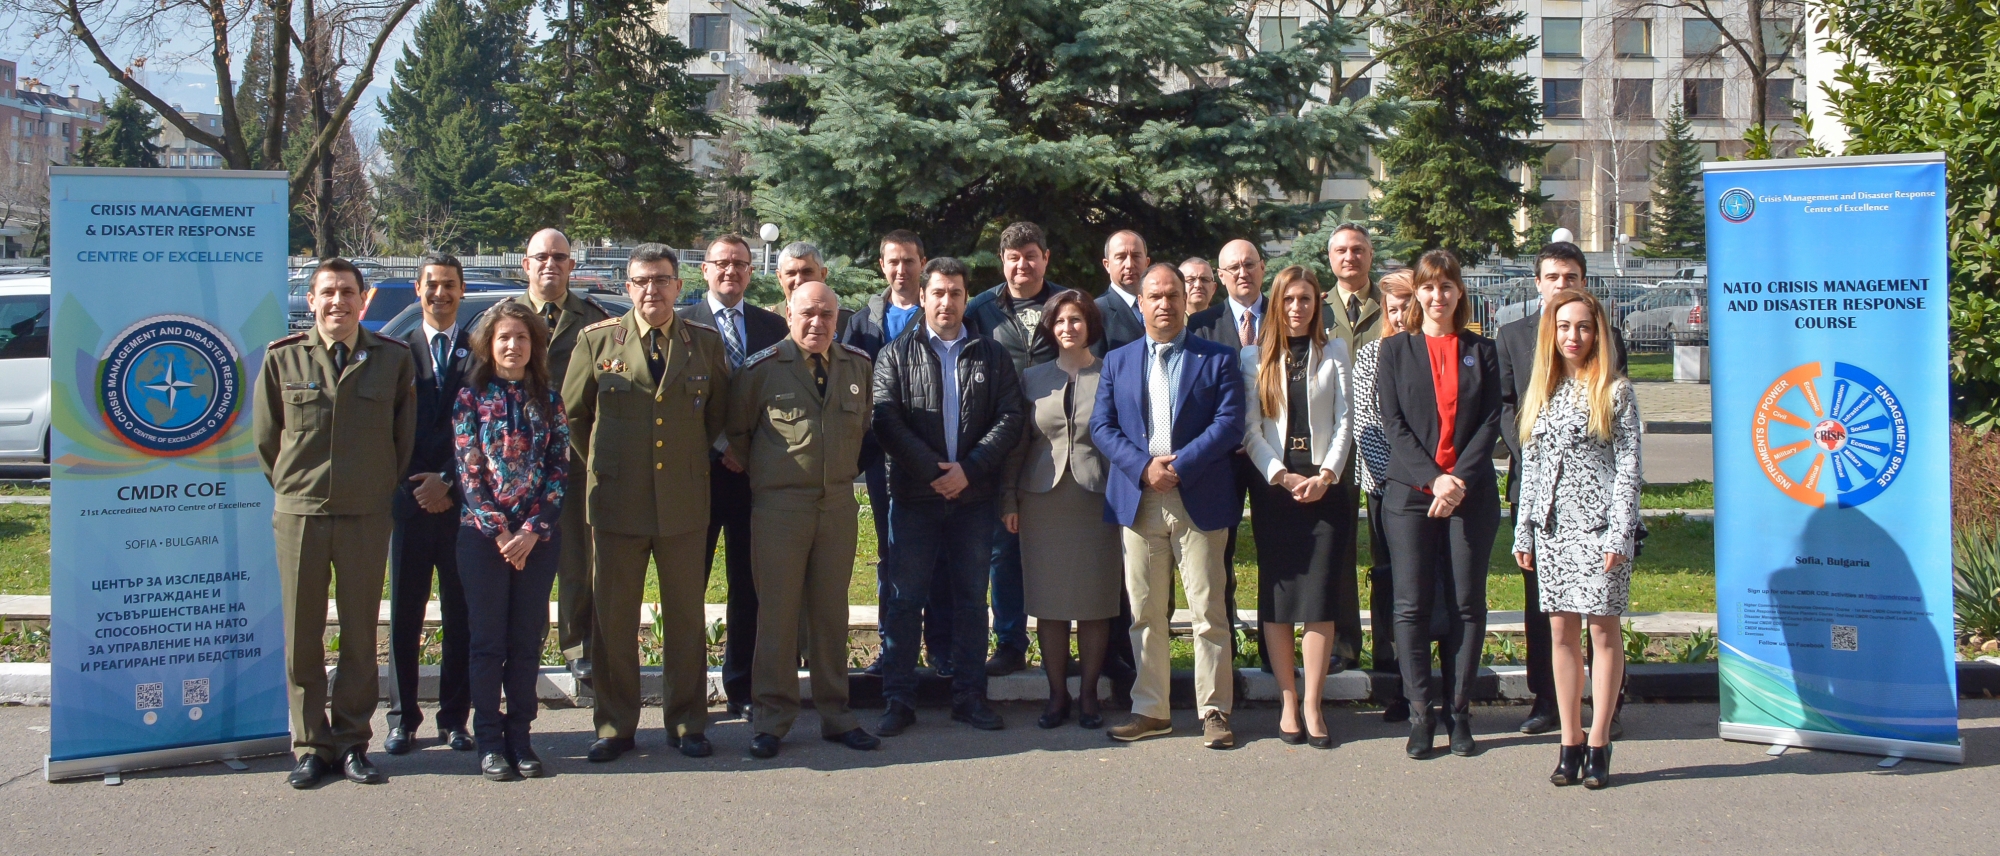 Five-day Crisis Management and Disaster Response Course was successfully conducted